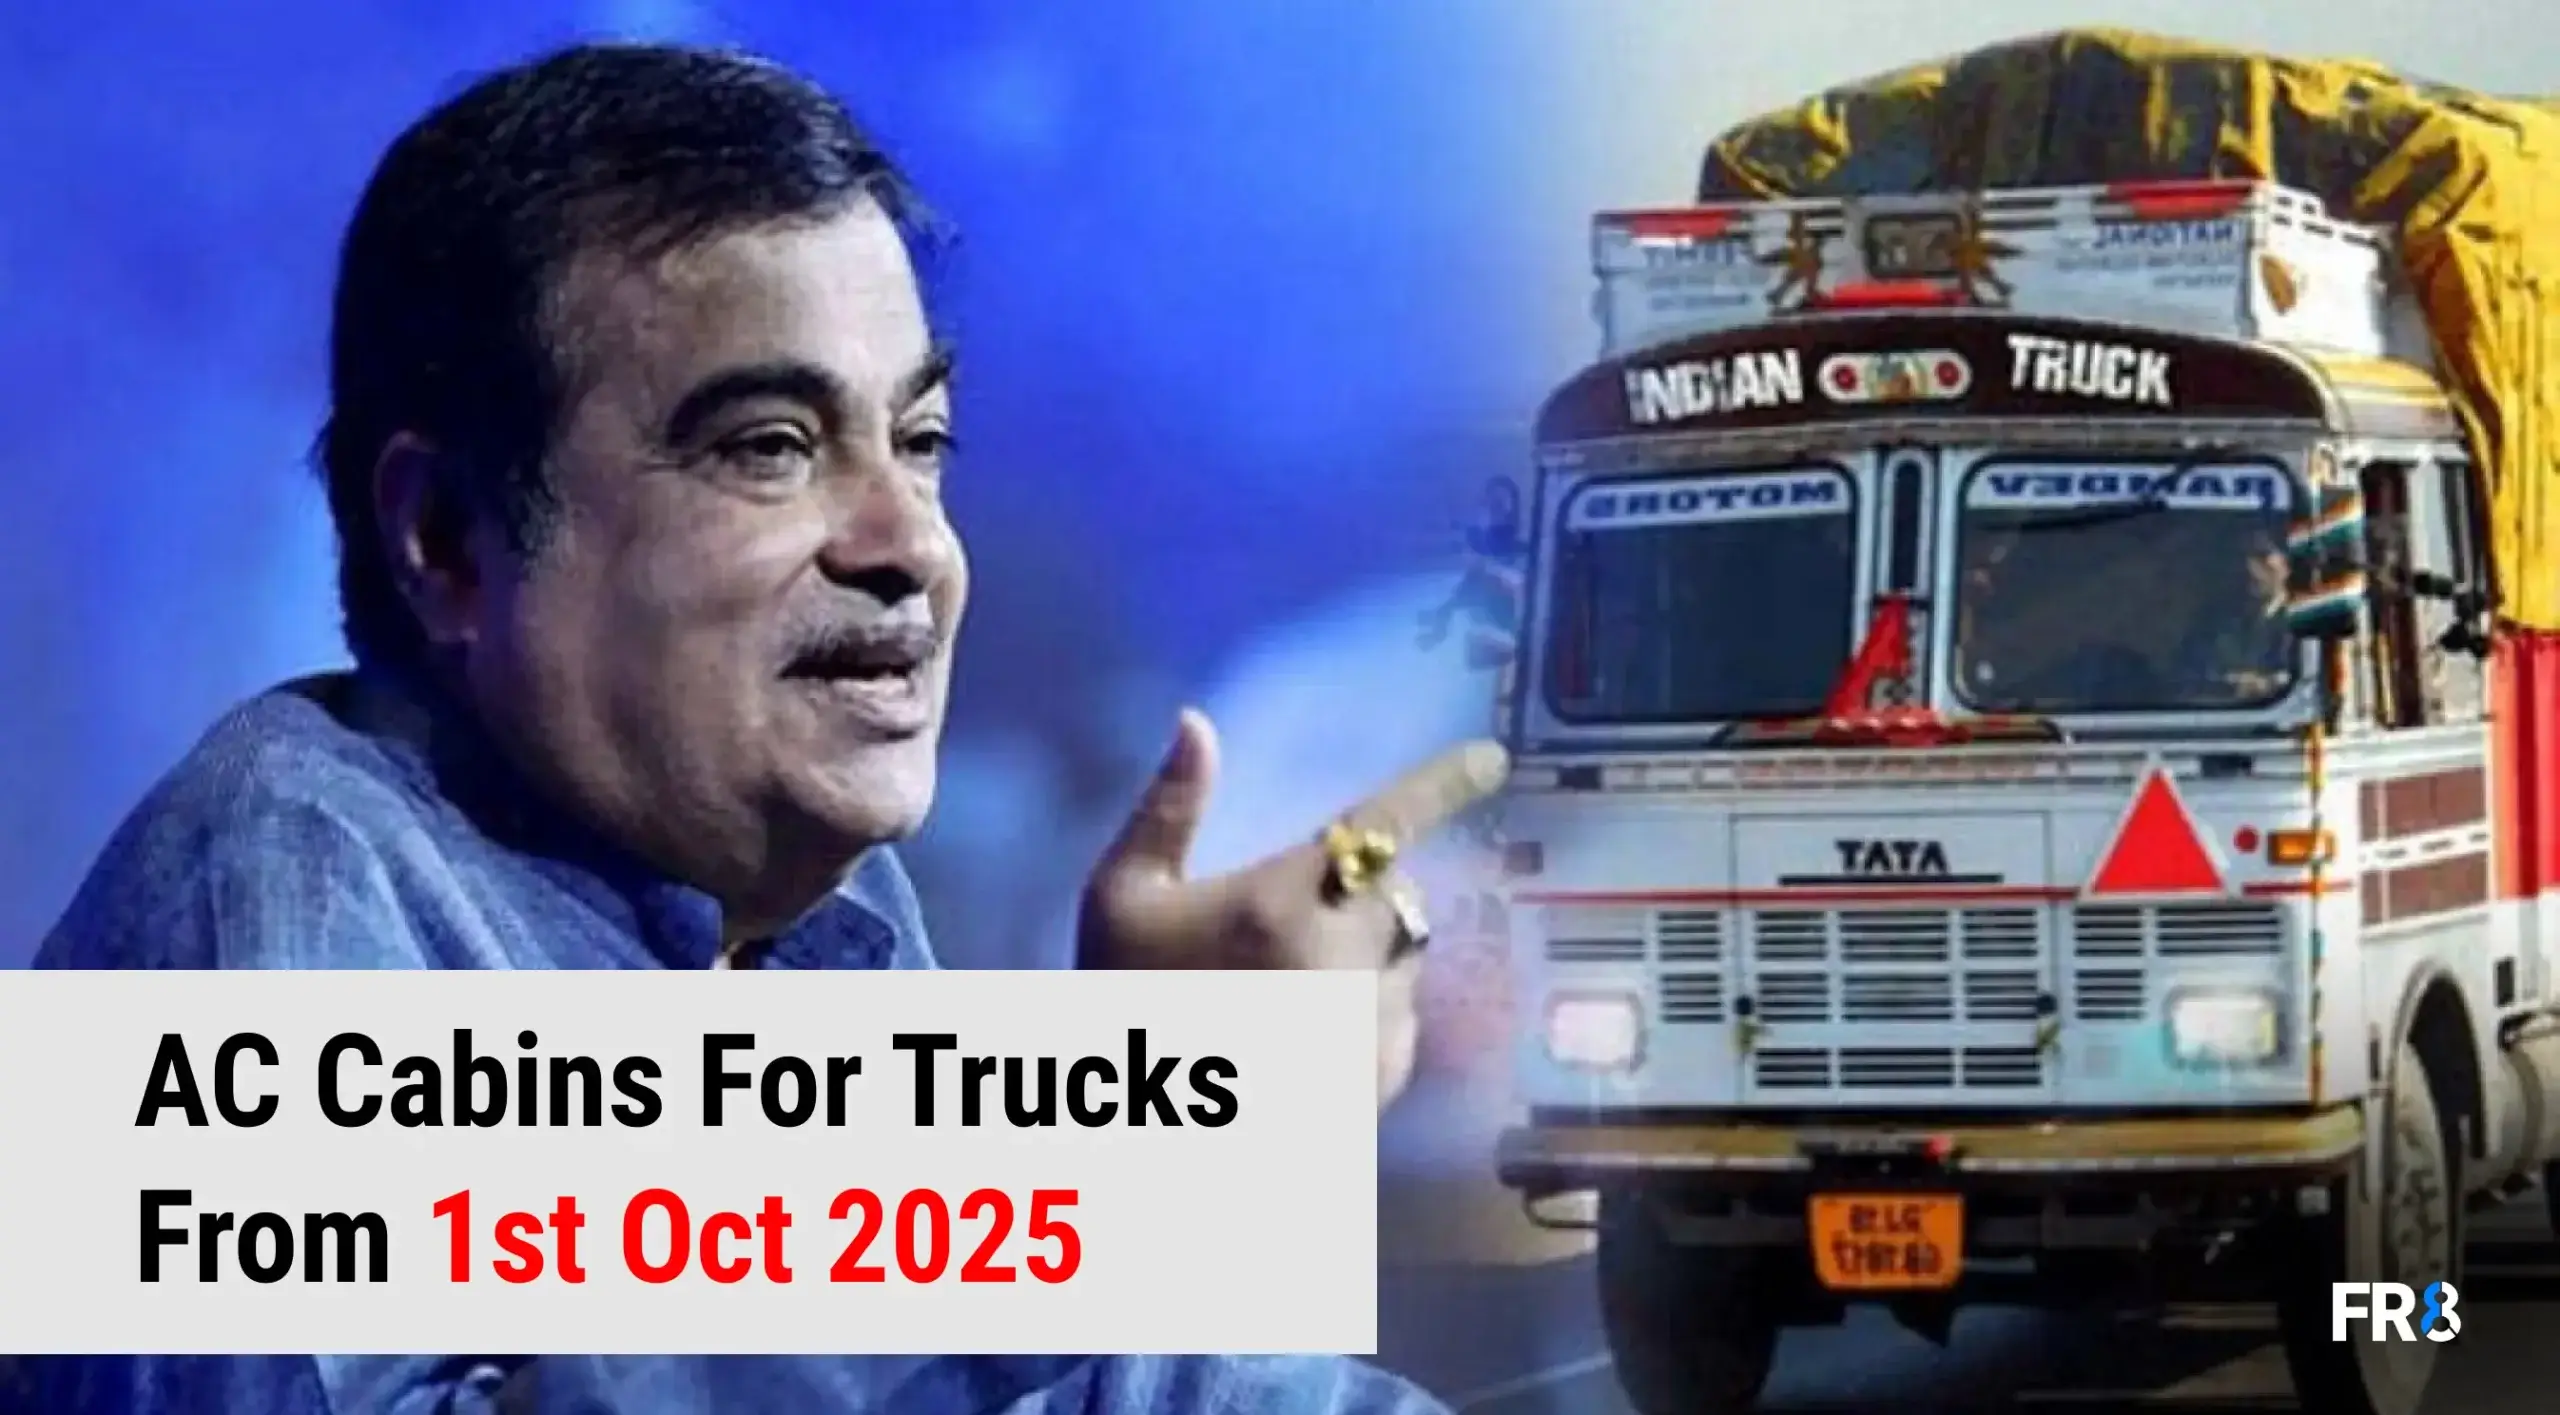 AC cabins for trucks from October 1st 2025